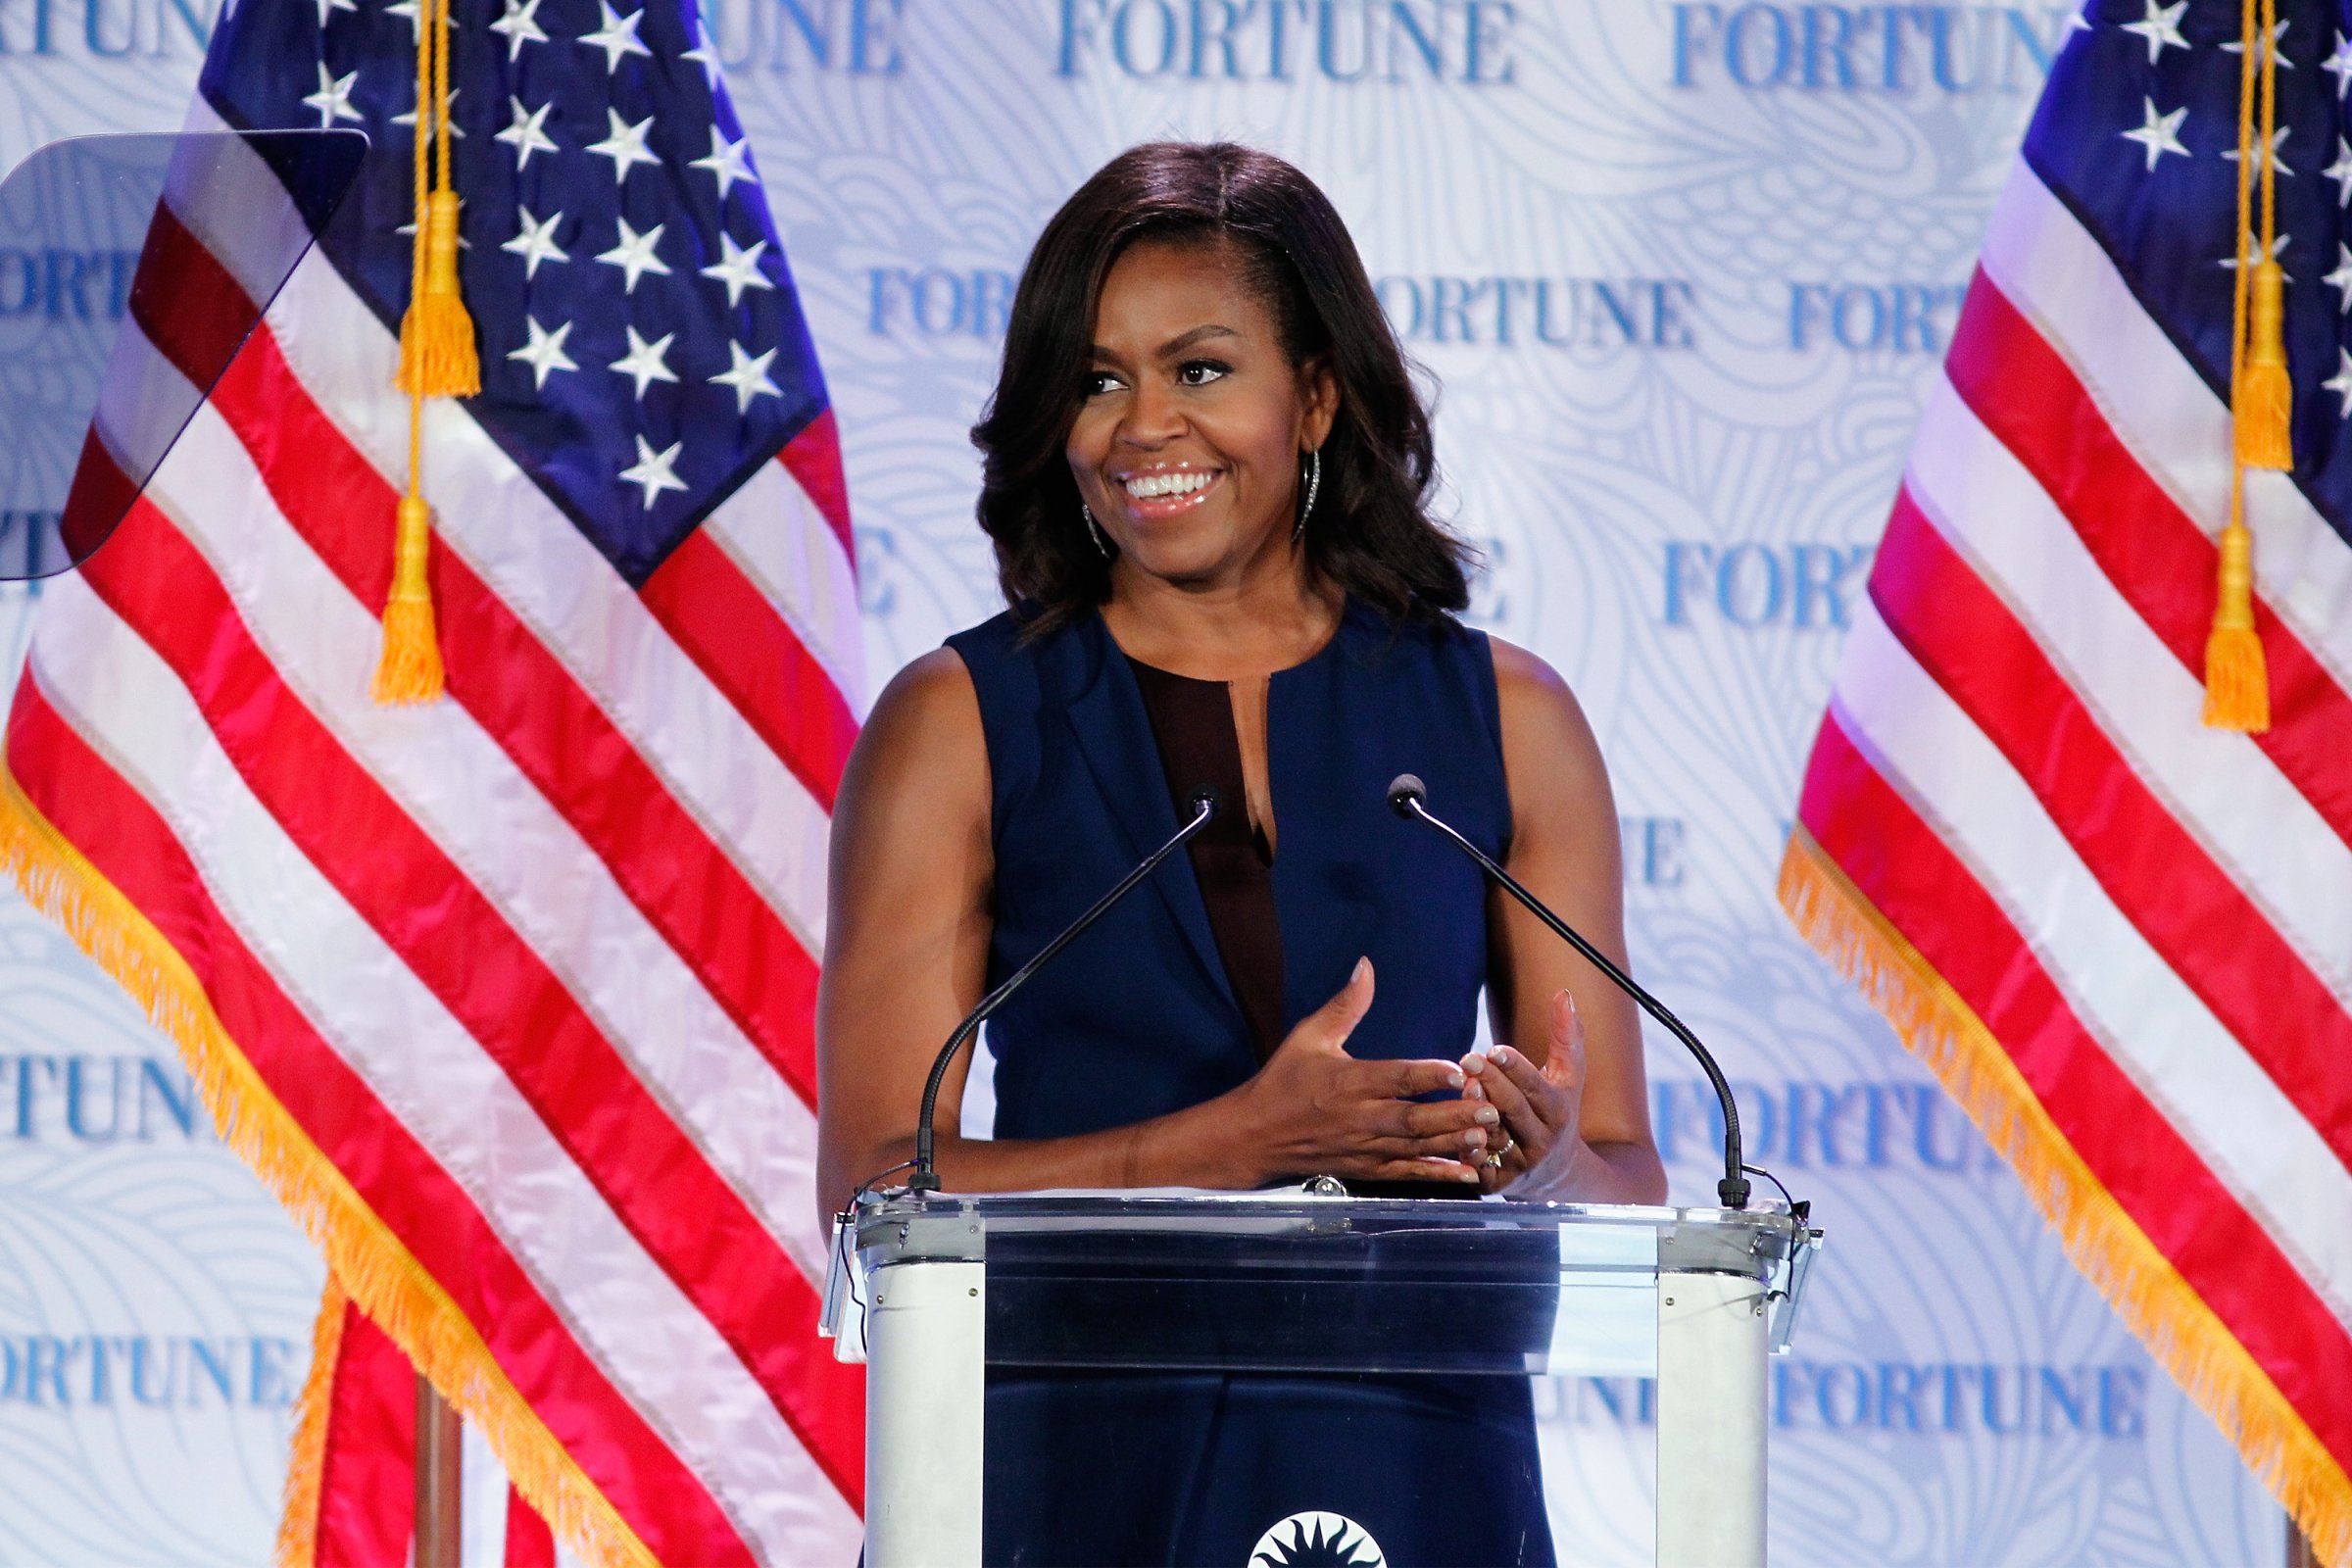 U.S. First Lady Michelle Obama speaks onstage during Fortune's Most Powerful Women Summit - Day 2 at The Robert and Arlene Kogod Courtyard on October 13, 2015 in Washington, DC.